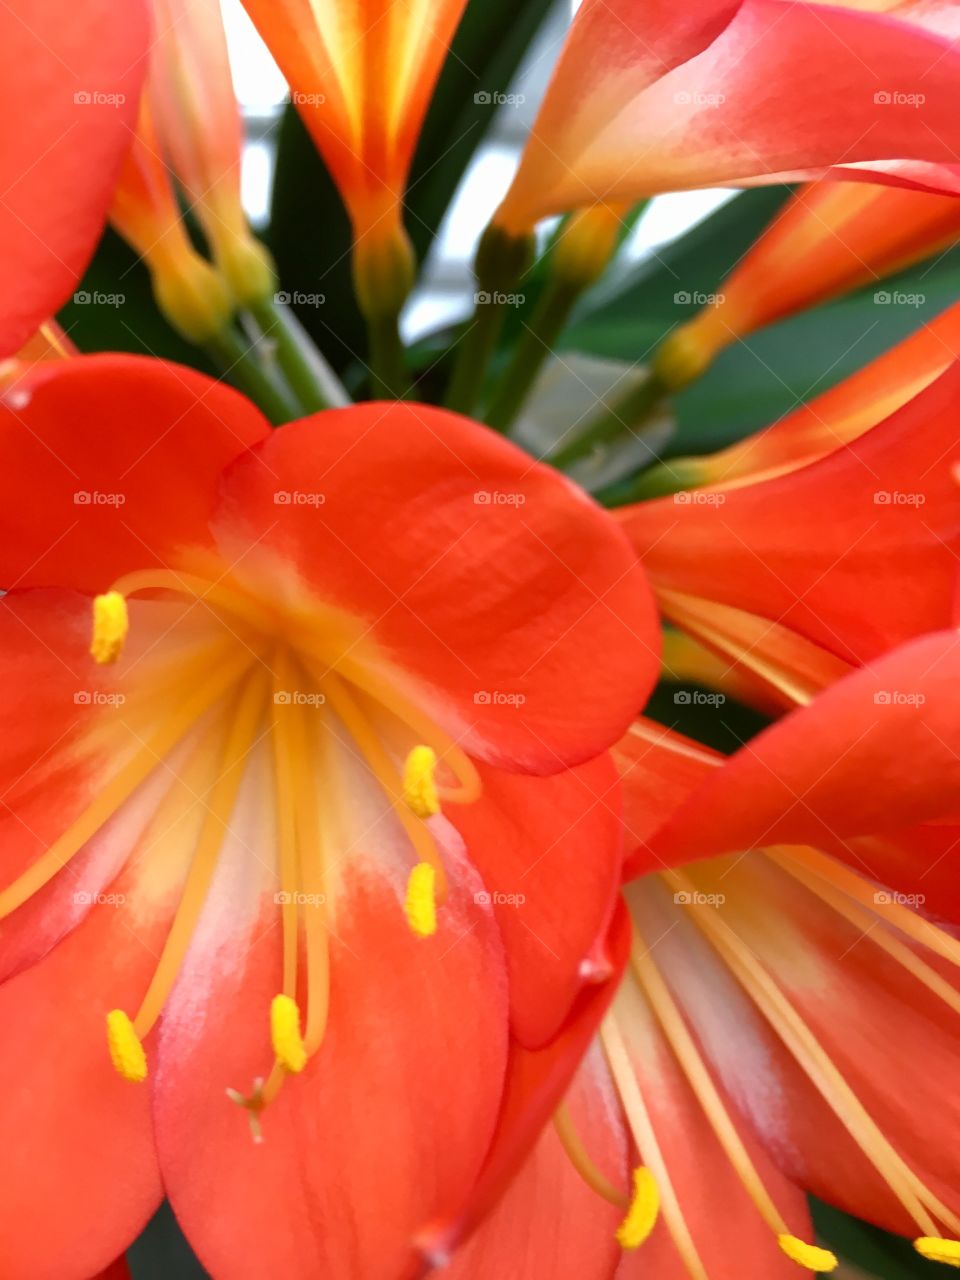 Beautiful bright orange flowers - spring is in the air. Blooming marvellous. Sunnier days are ahead. 